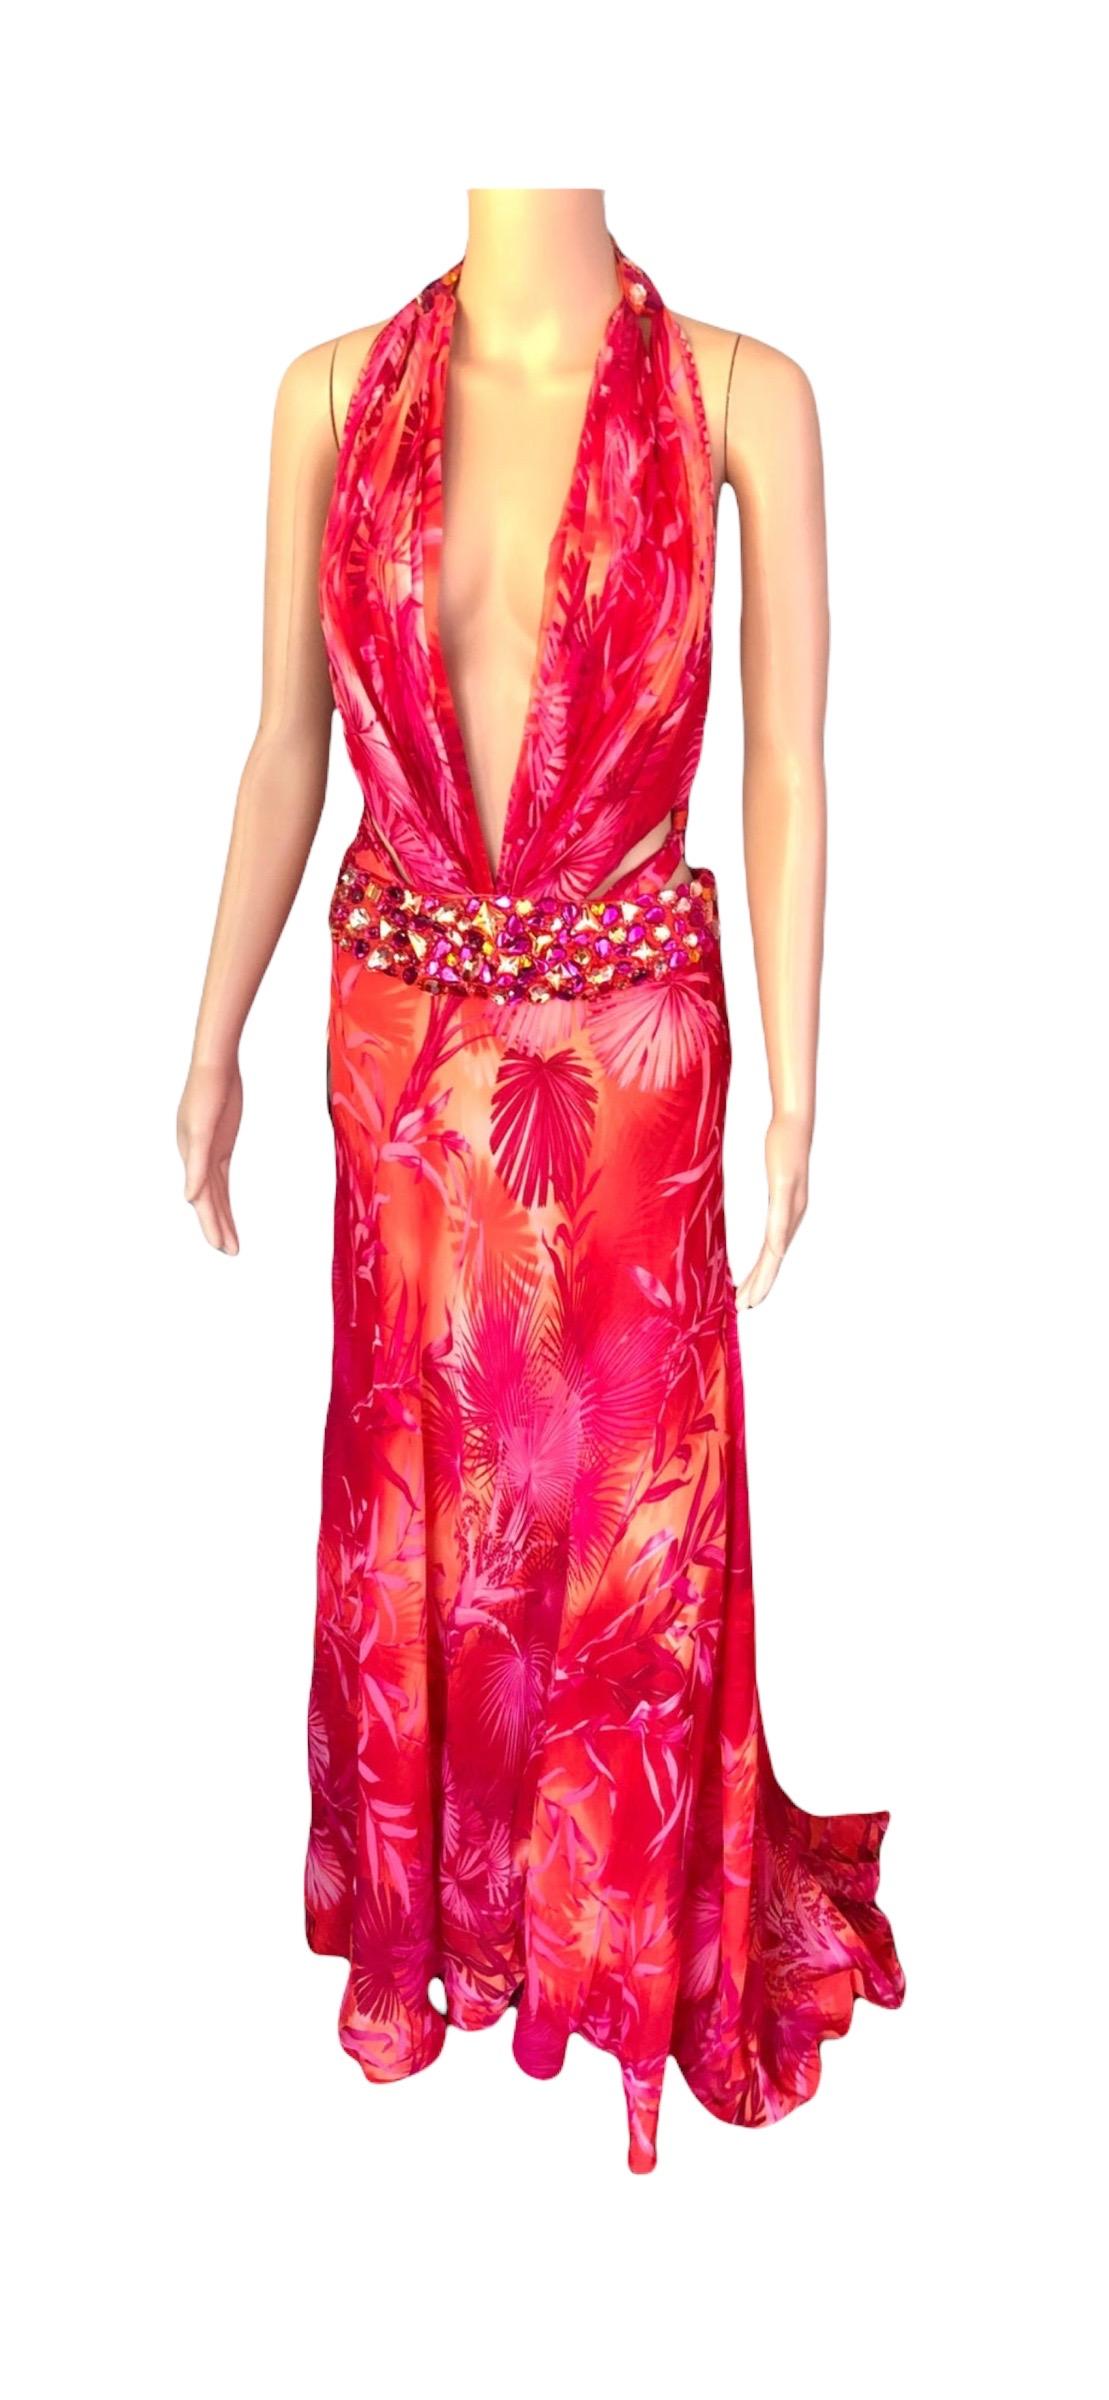 Gianni Versace S/S 2000 Runway Embellished Jungle Print Evening Dress Gown 9